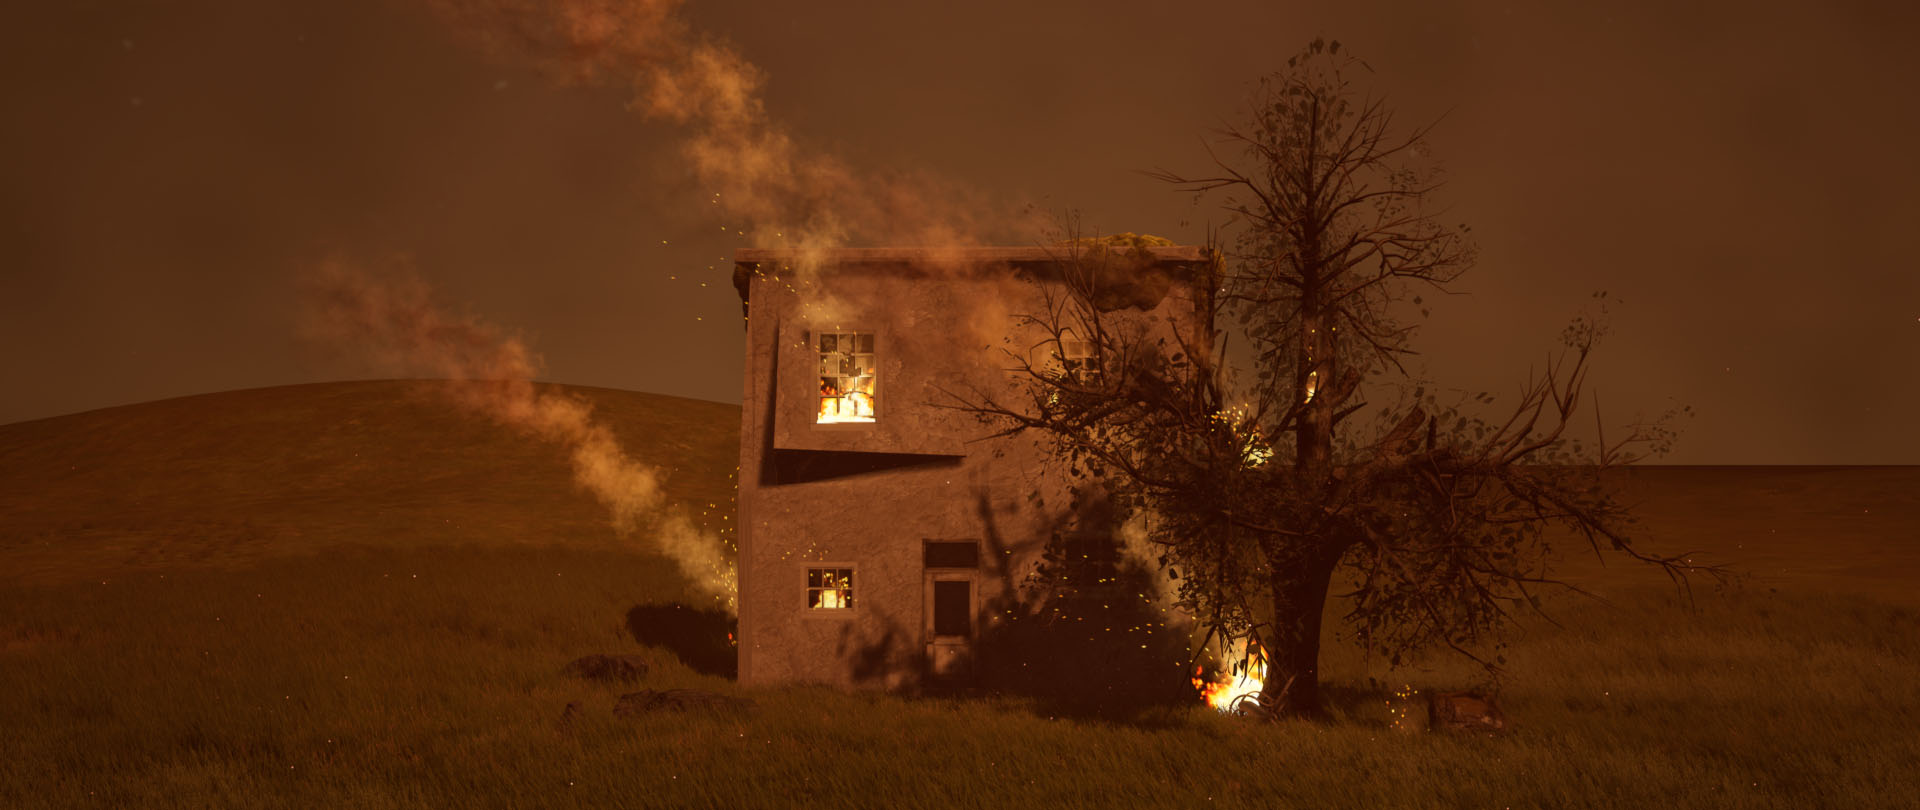 Burning house in grassland with orange sky and grey clouds - screenshot from the game